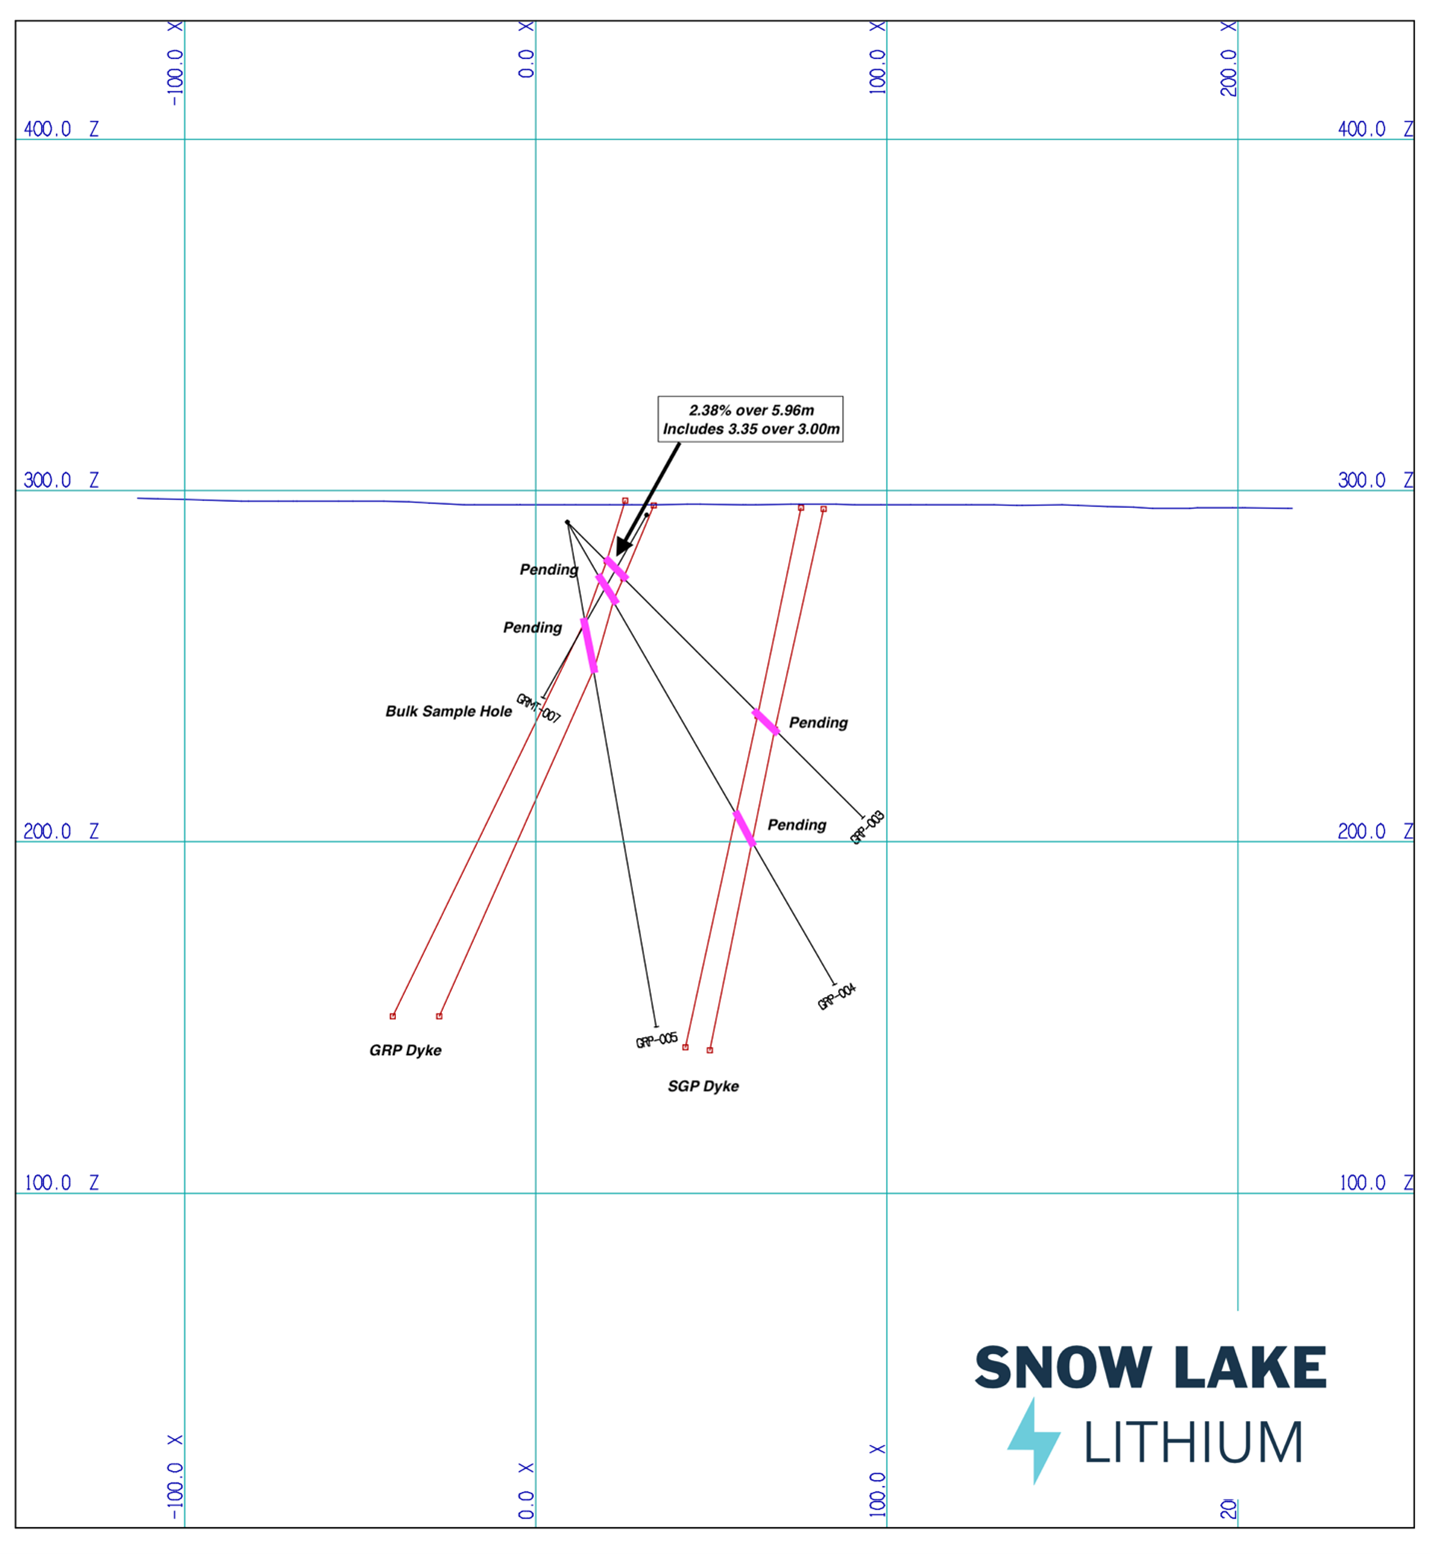 Snow Lake Resources Ltd., Thursday, May 19, 2022, press release image